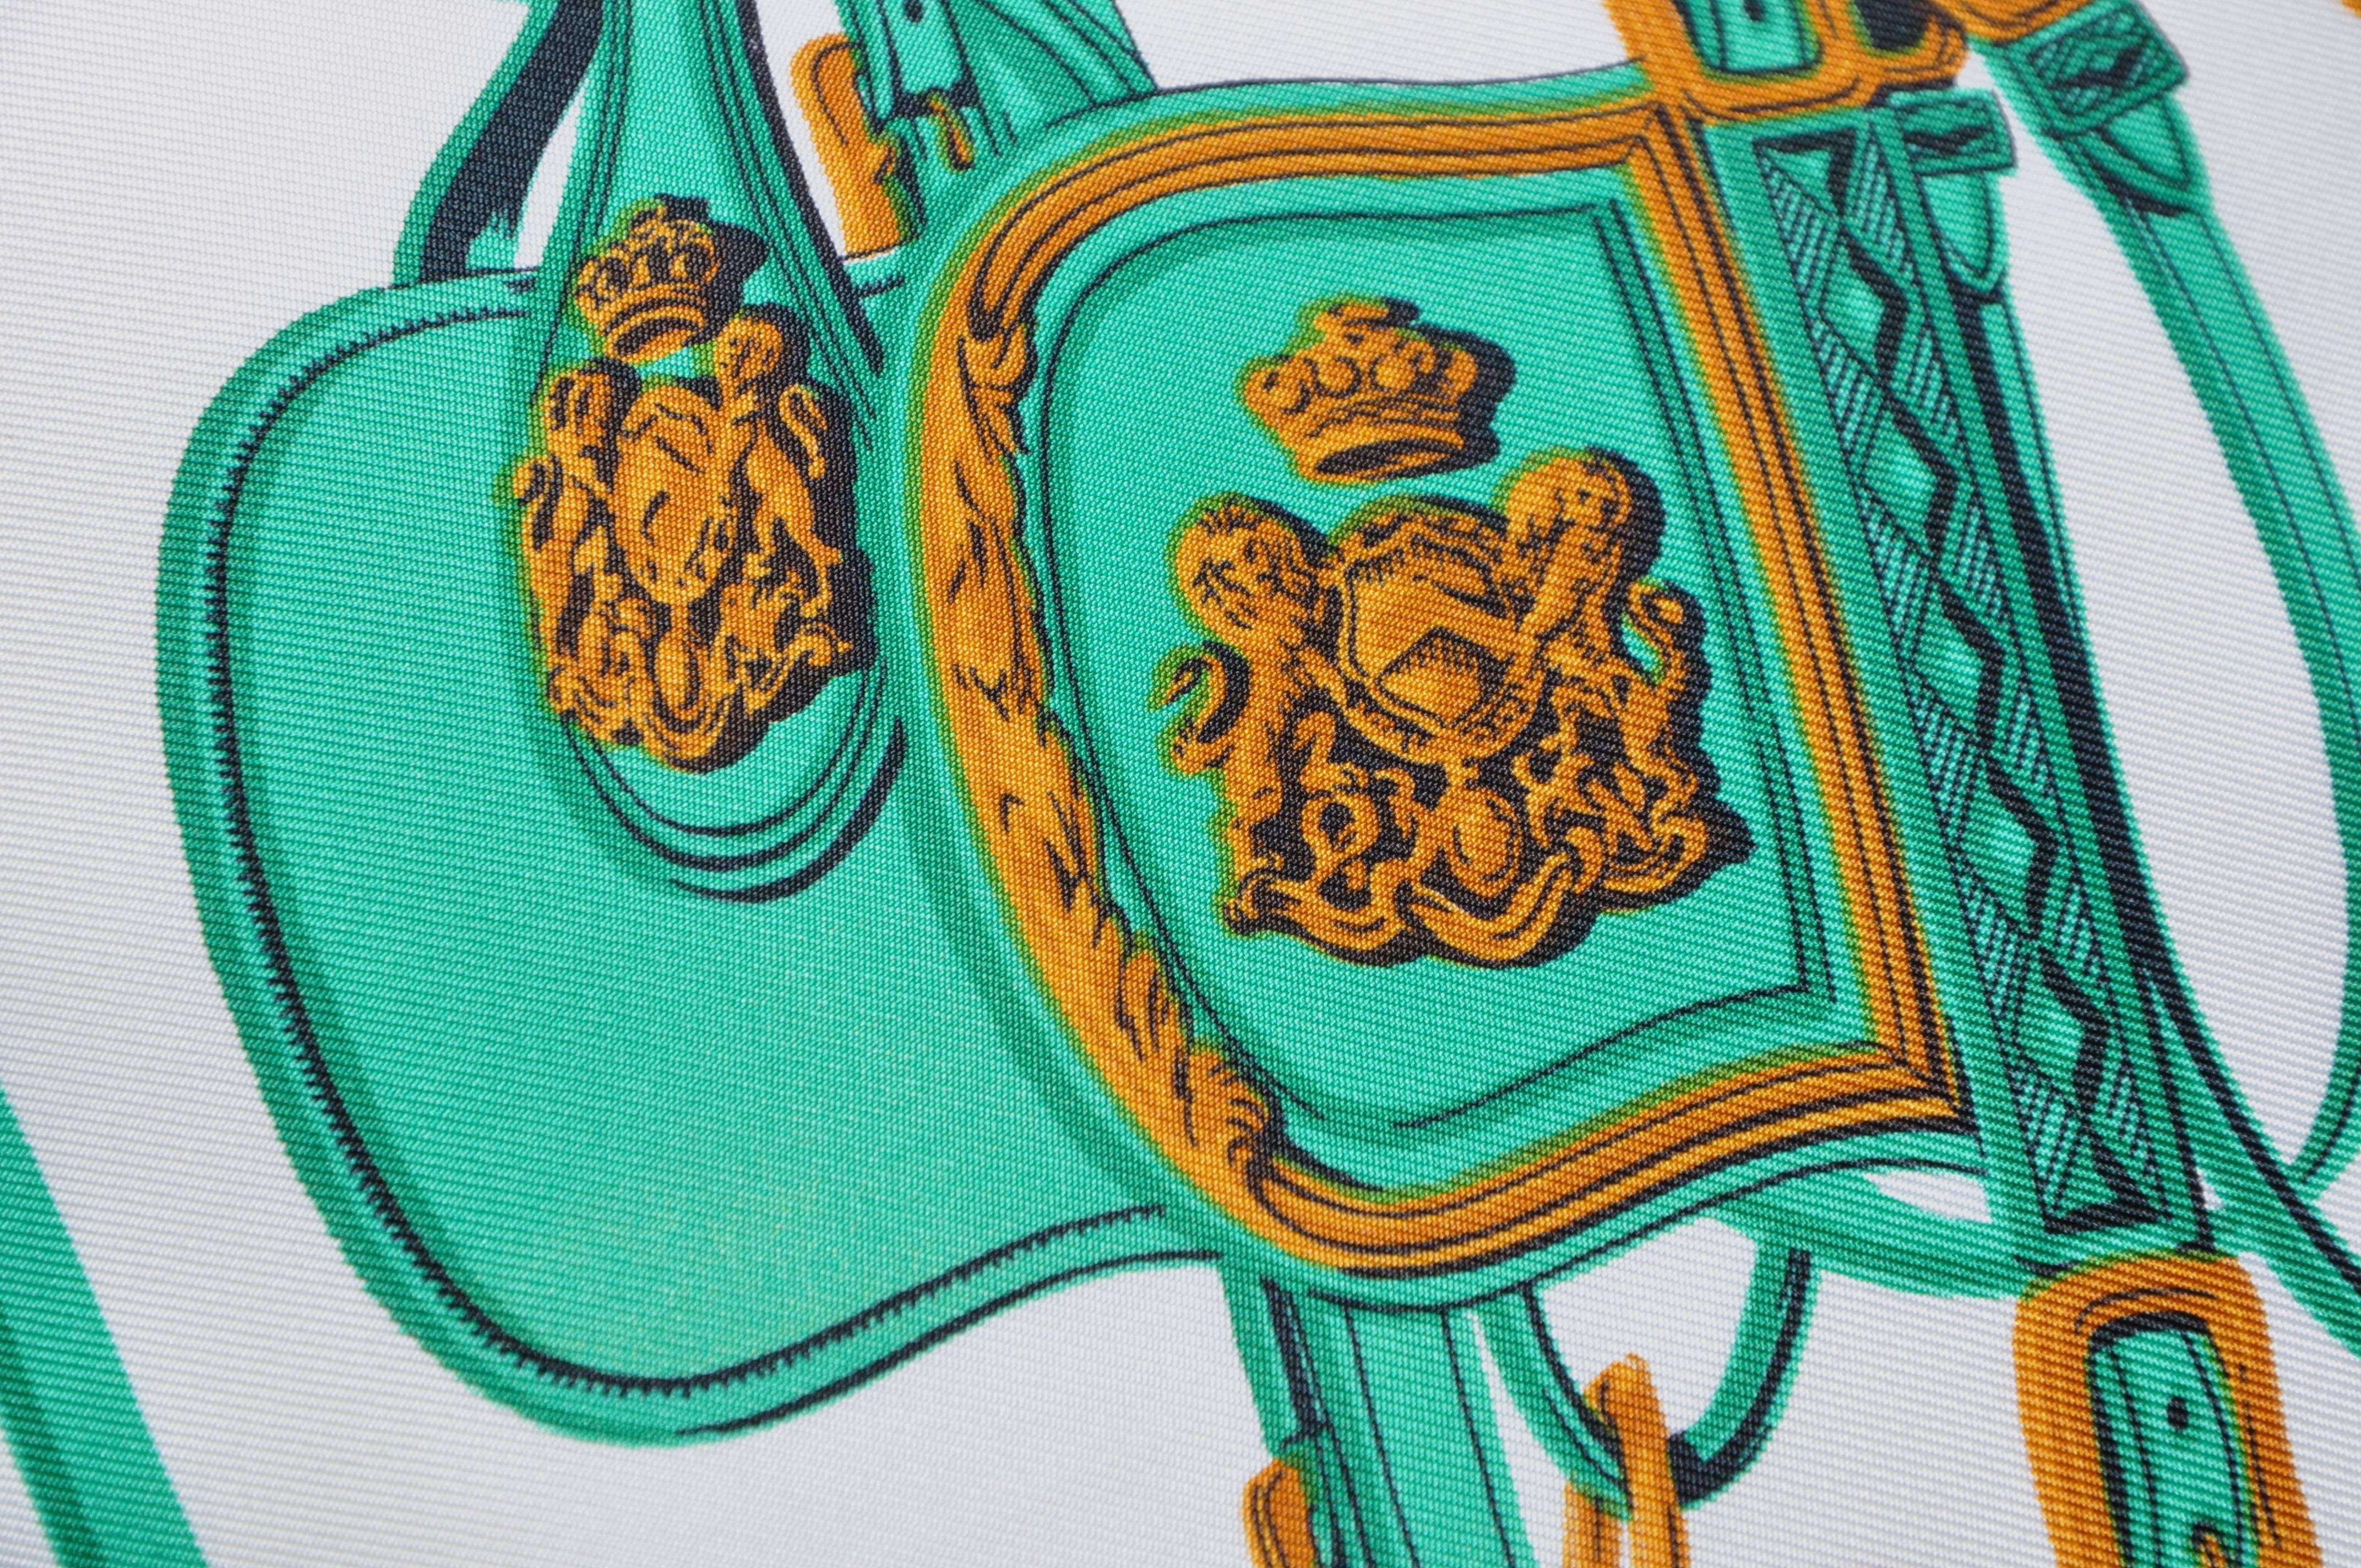 French Vintage Hermes Green Equestrian Silk Scarf and Irish Linen Cushion Pillow